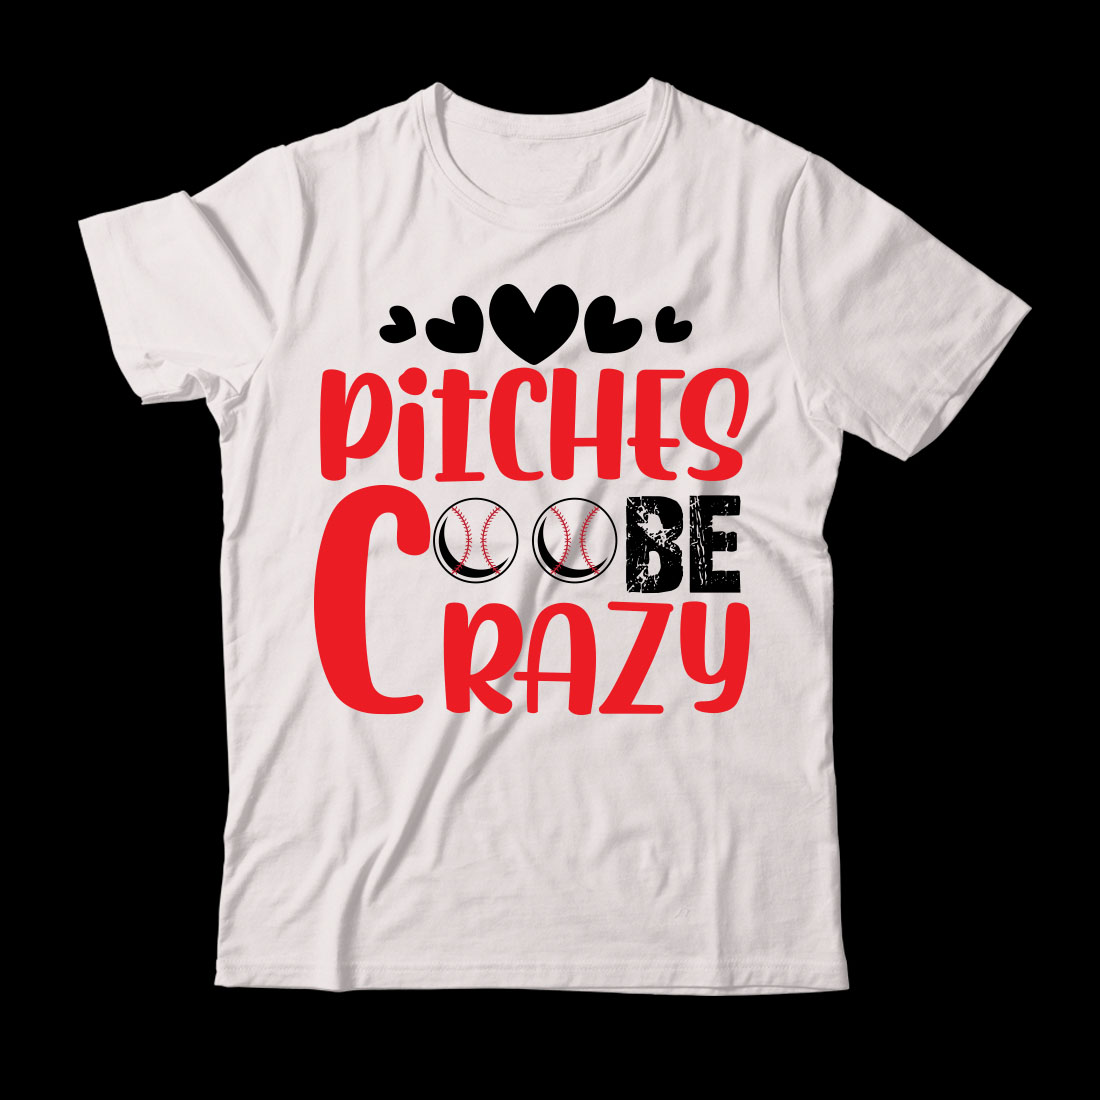 White t - shirt that says bitchs be crazy.